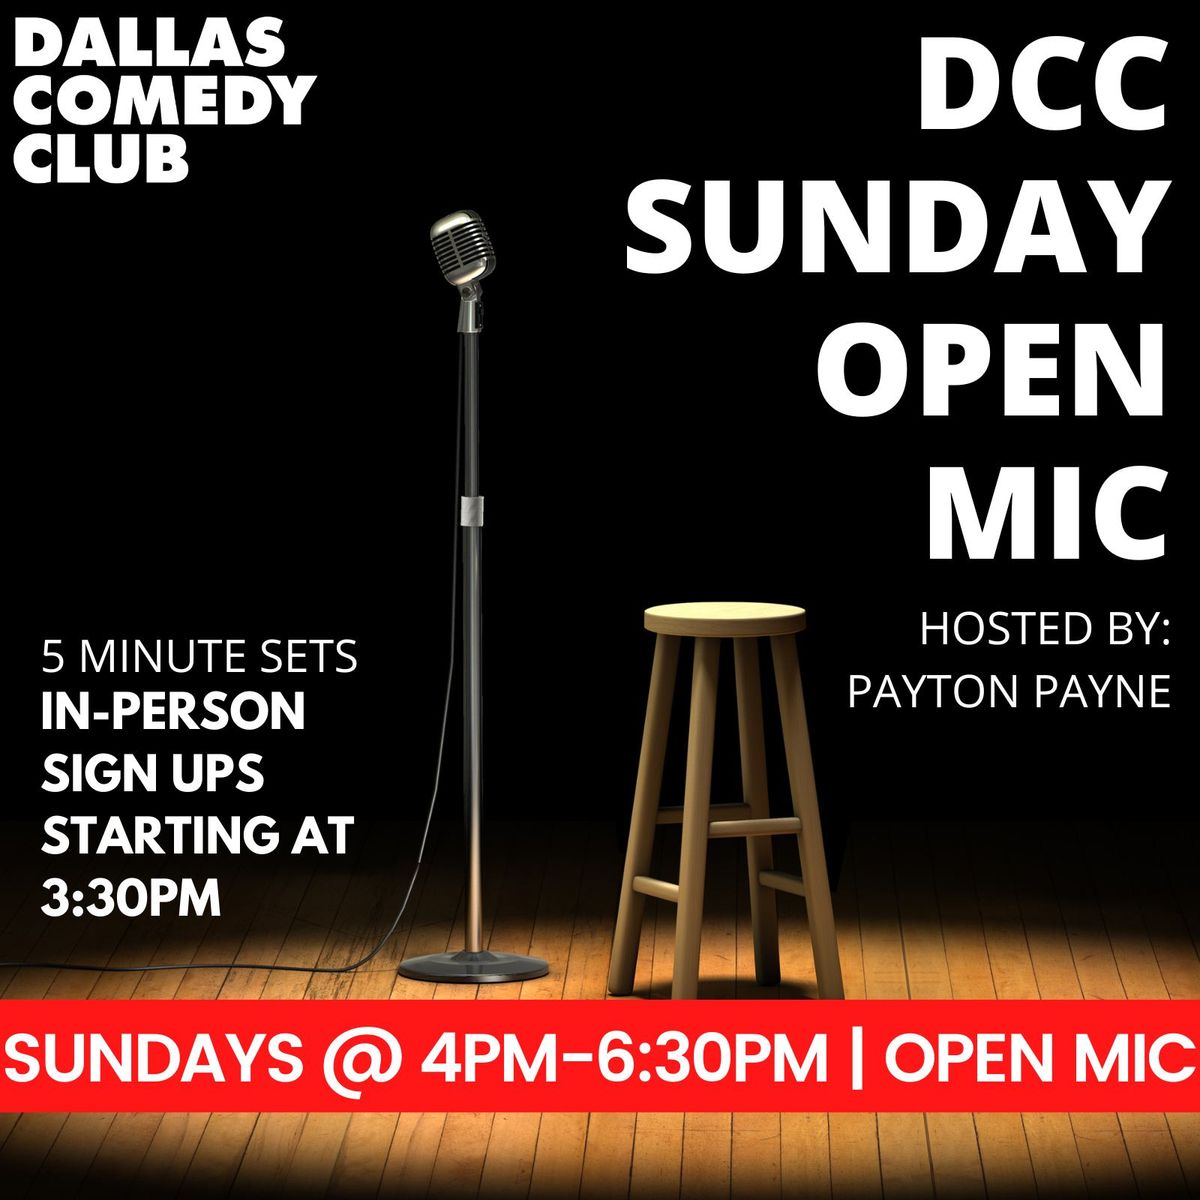 The DCC Sunday Open Mic